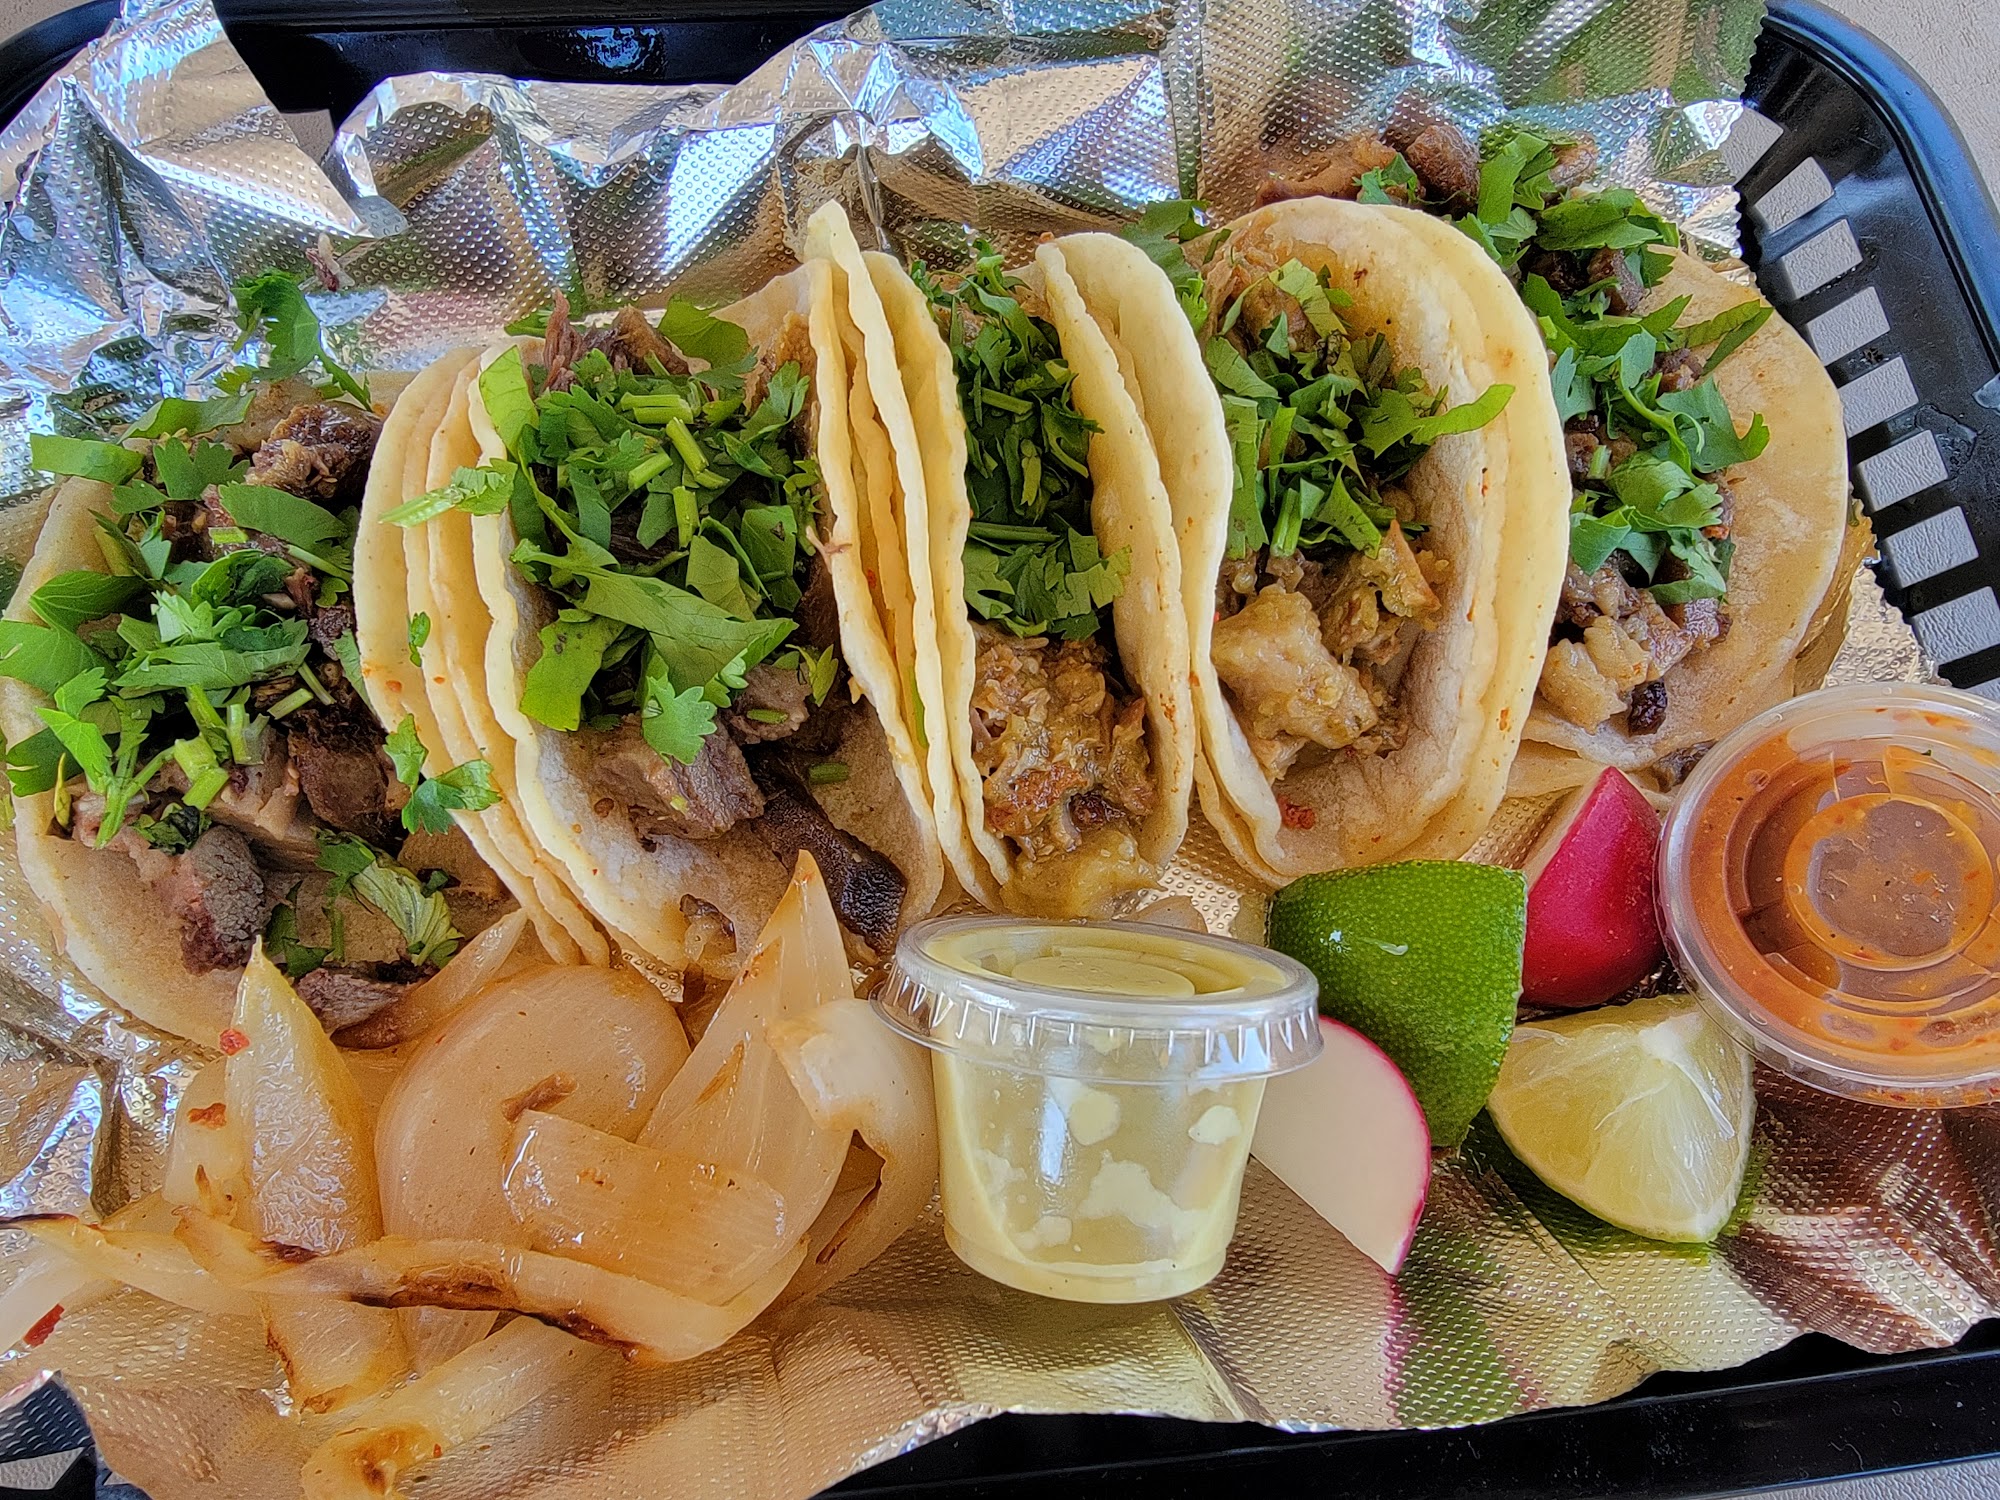 Don Pancho's Taco Place